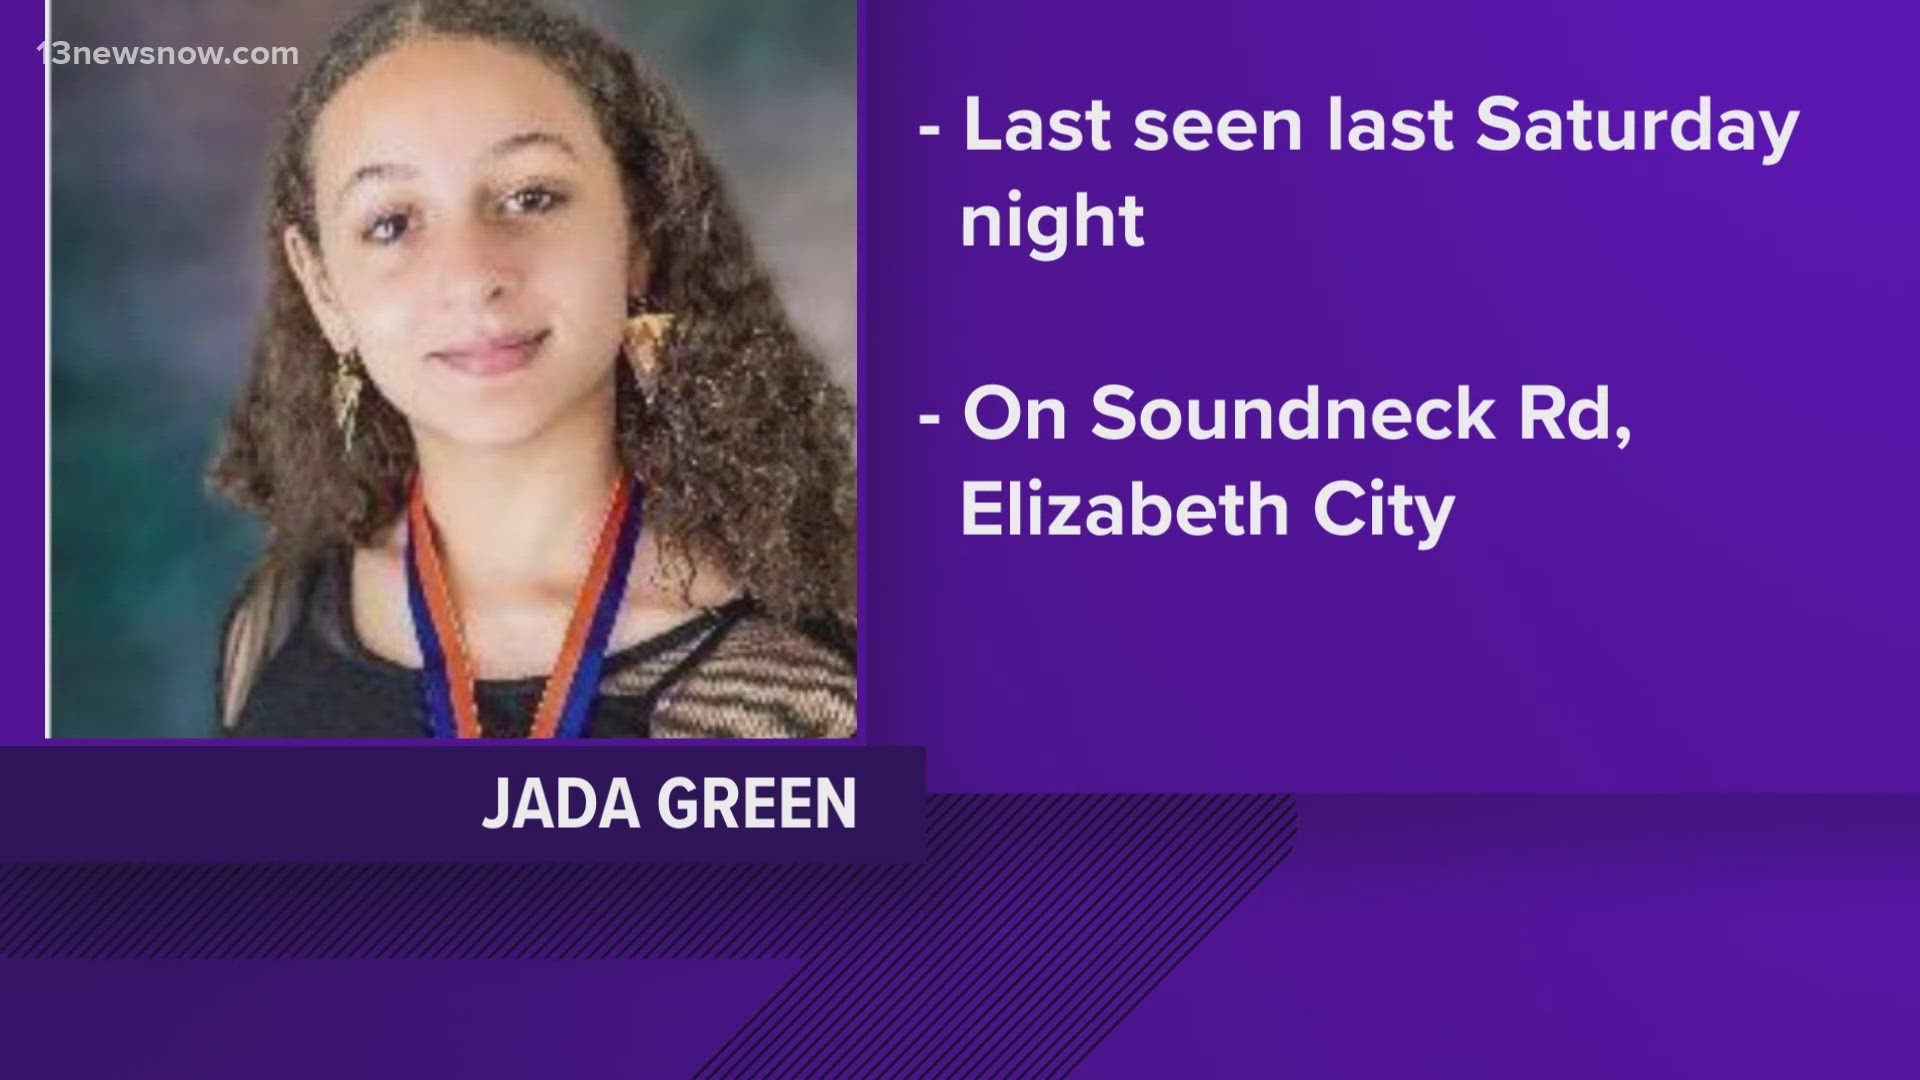 No one has seen 14-year-old Jada Green for almost a week now.